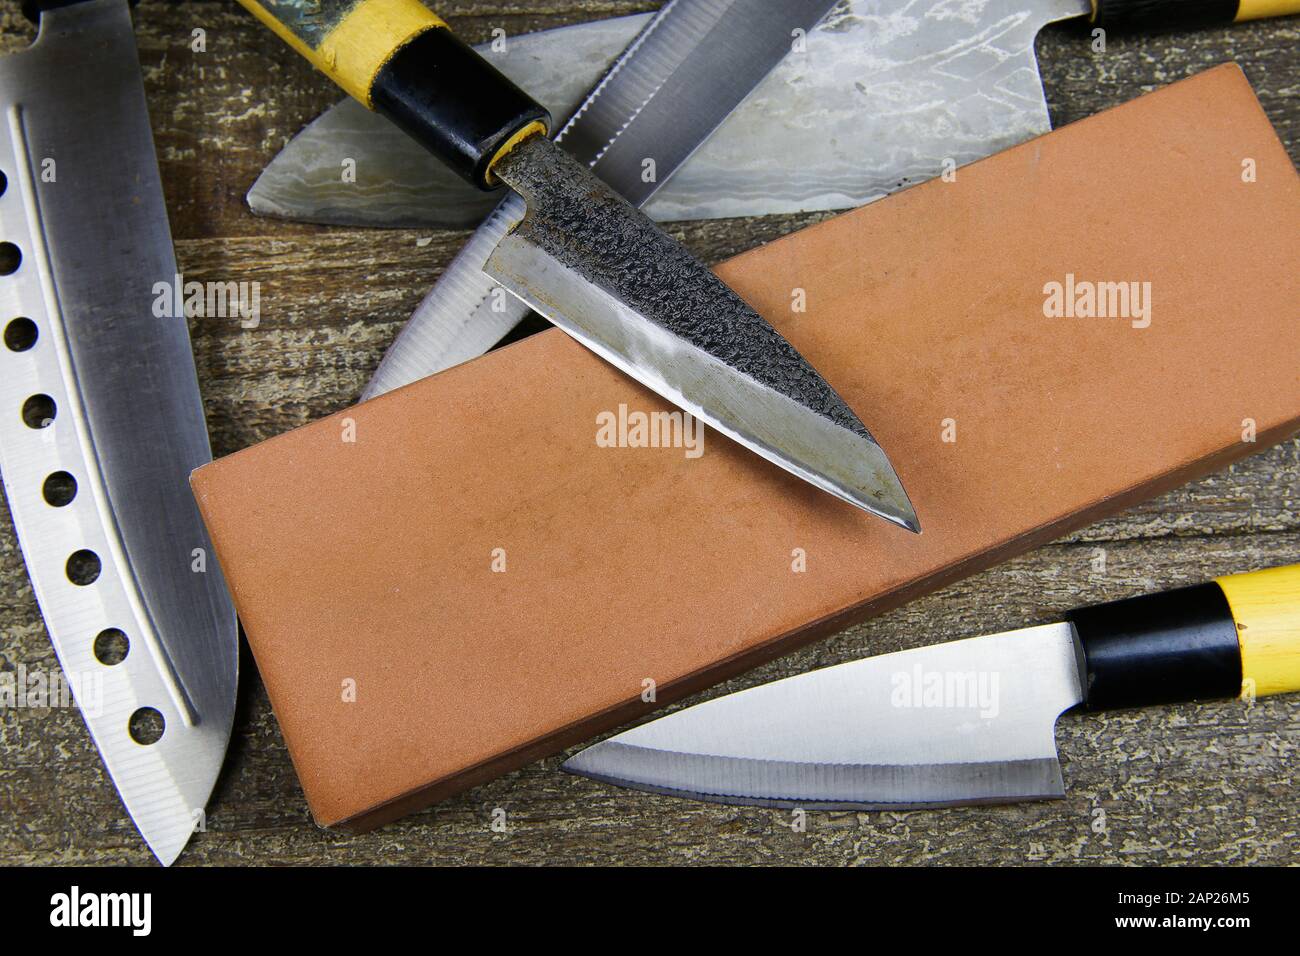 Grinding knifes: Close up of different metal japanese kitchen knifes with sharpening stone on wood table Stock Photo